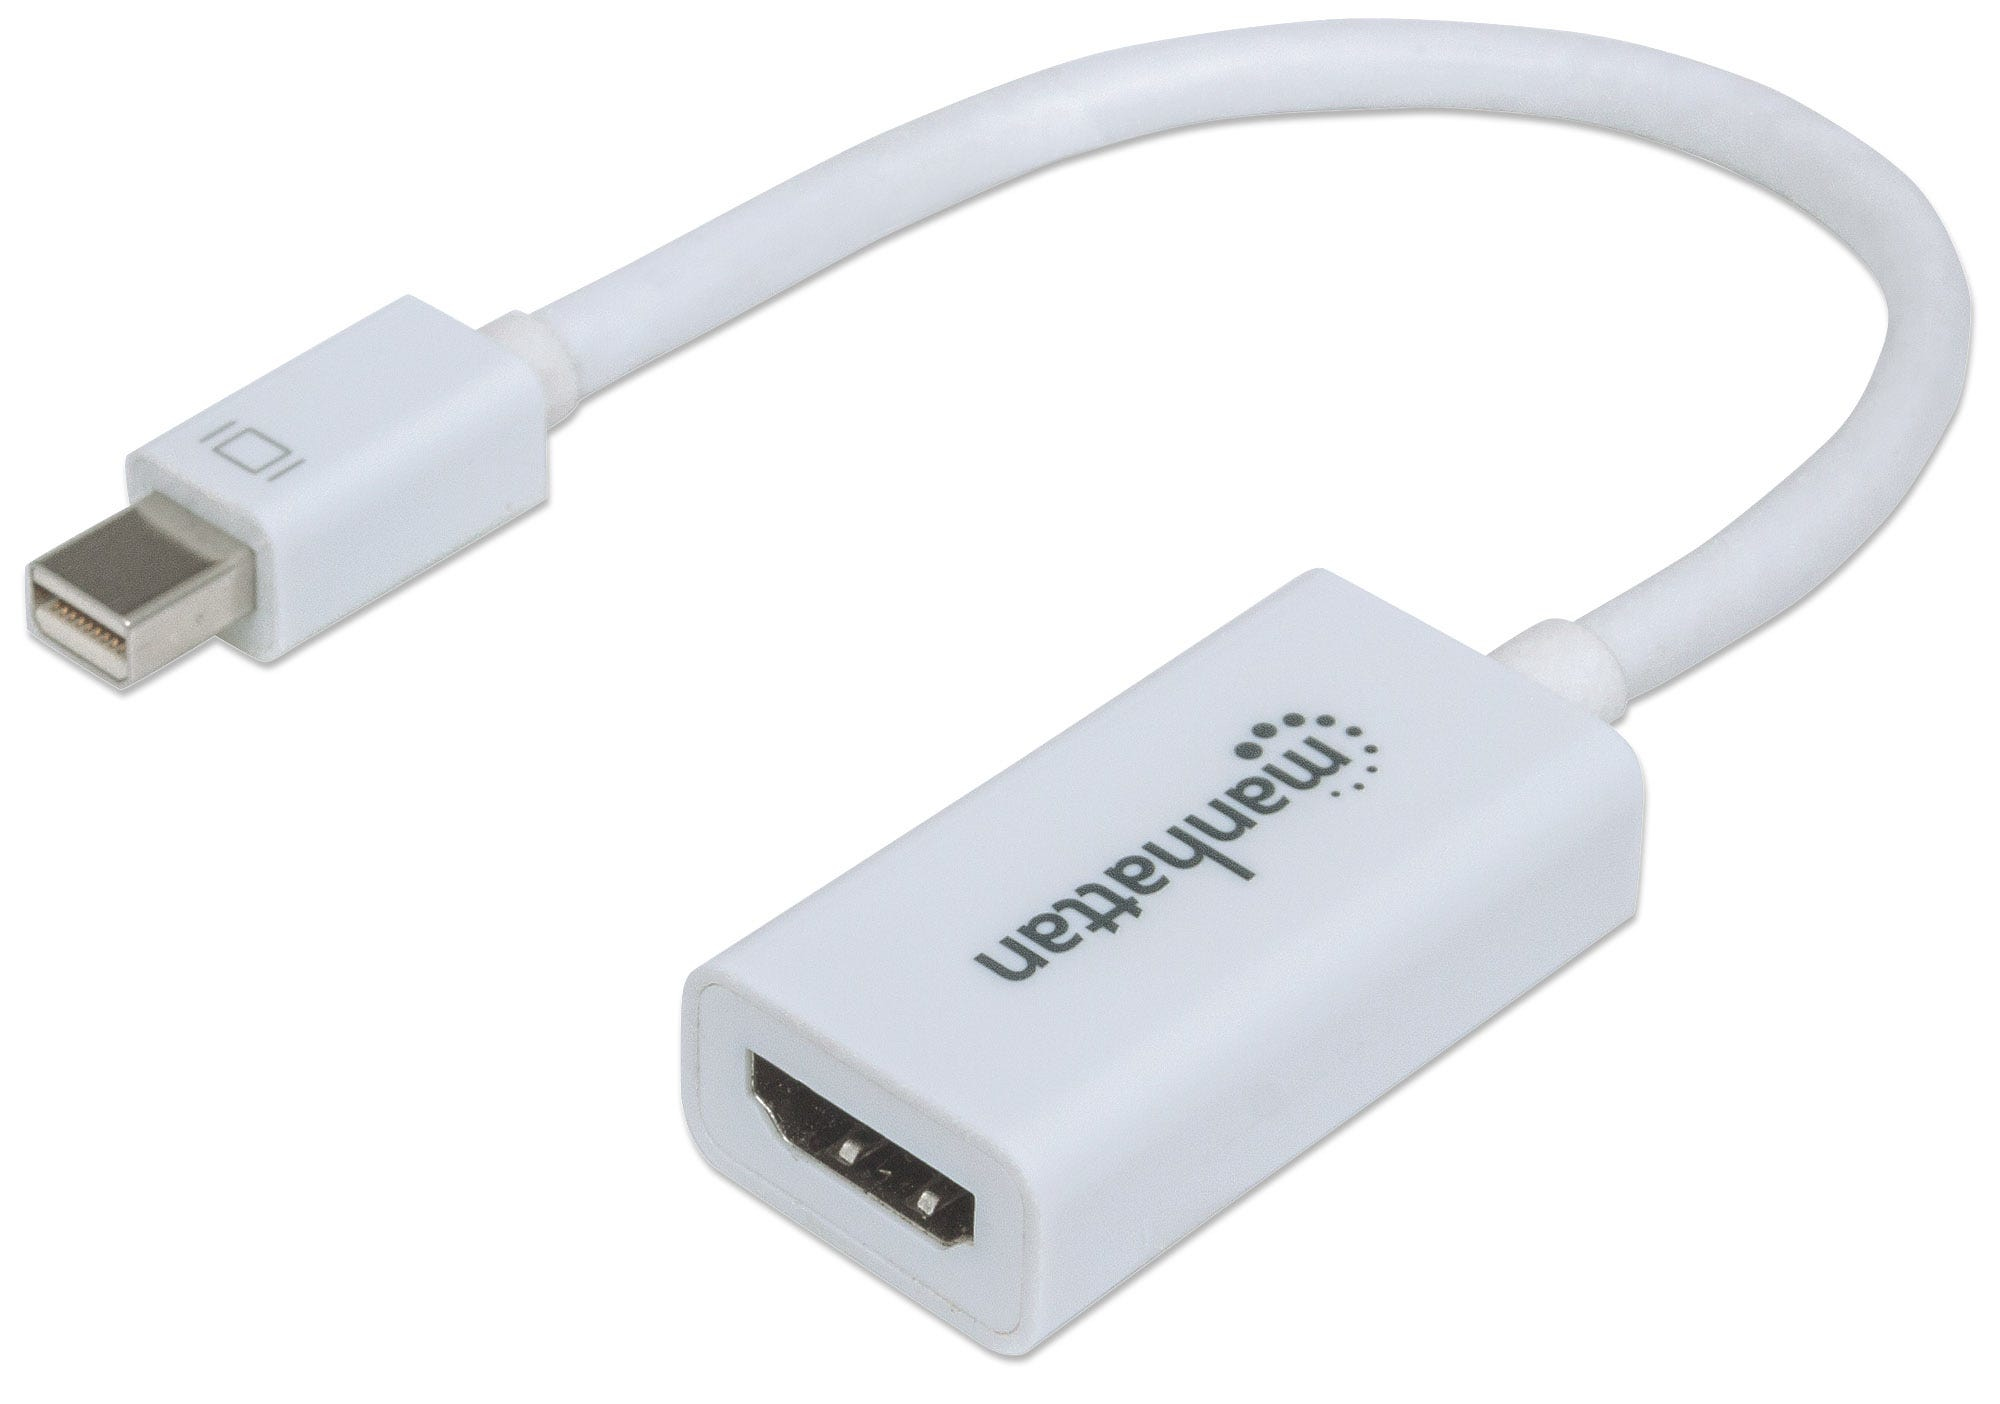 Manhattan Mini DisplayPort 1.2 to HDMI Adapter Cable, 1080p@60Hz, 17cm, Male to Female, White, Lifetime Warranty, Blister